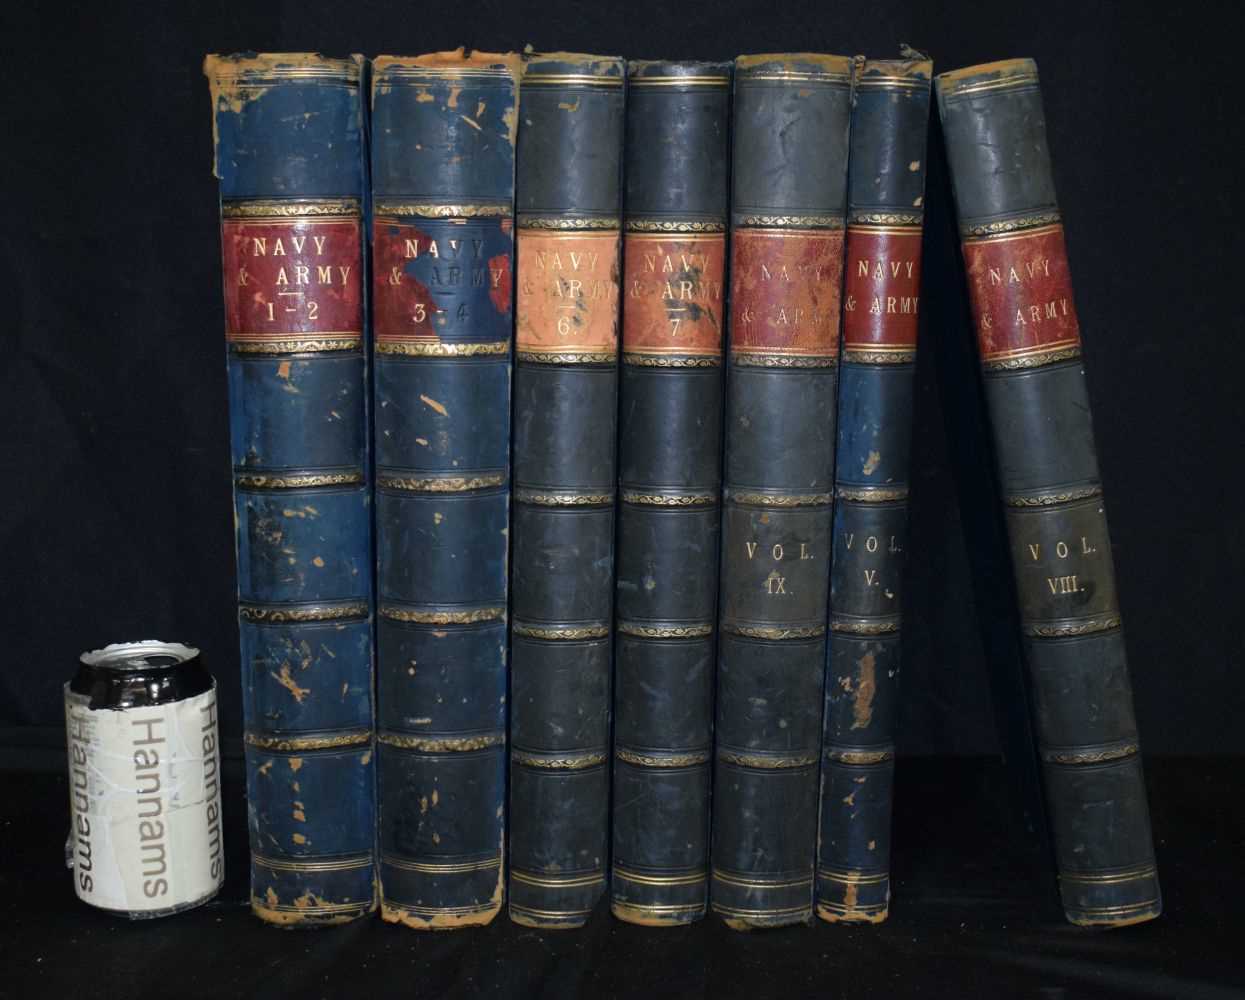 A collection of Navy and Army illustrated , 9 volumes over 7 books , published by Huson & Kearns 5.5 - Image 2 of 8